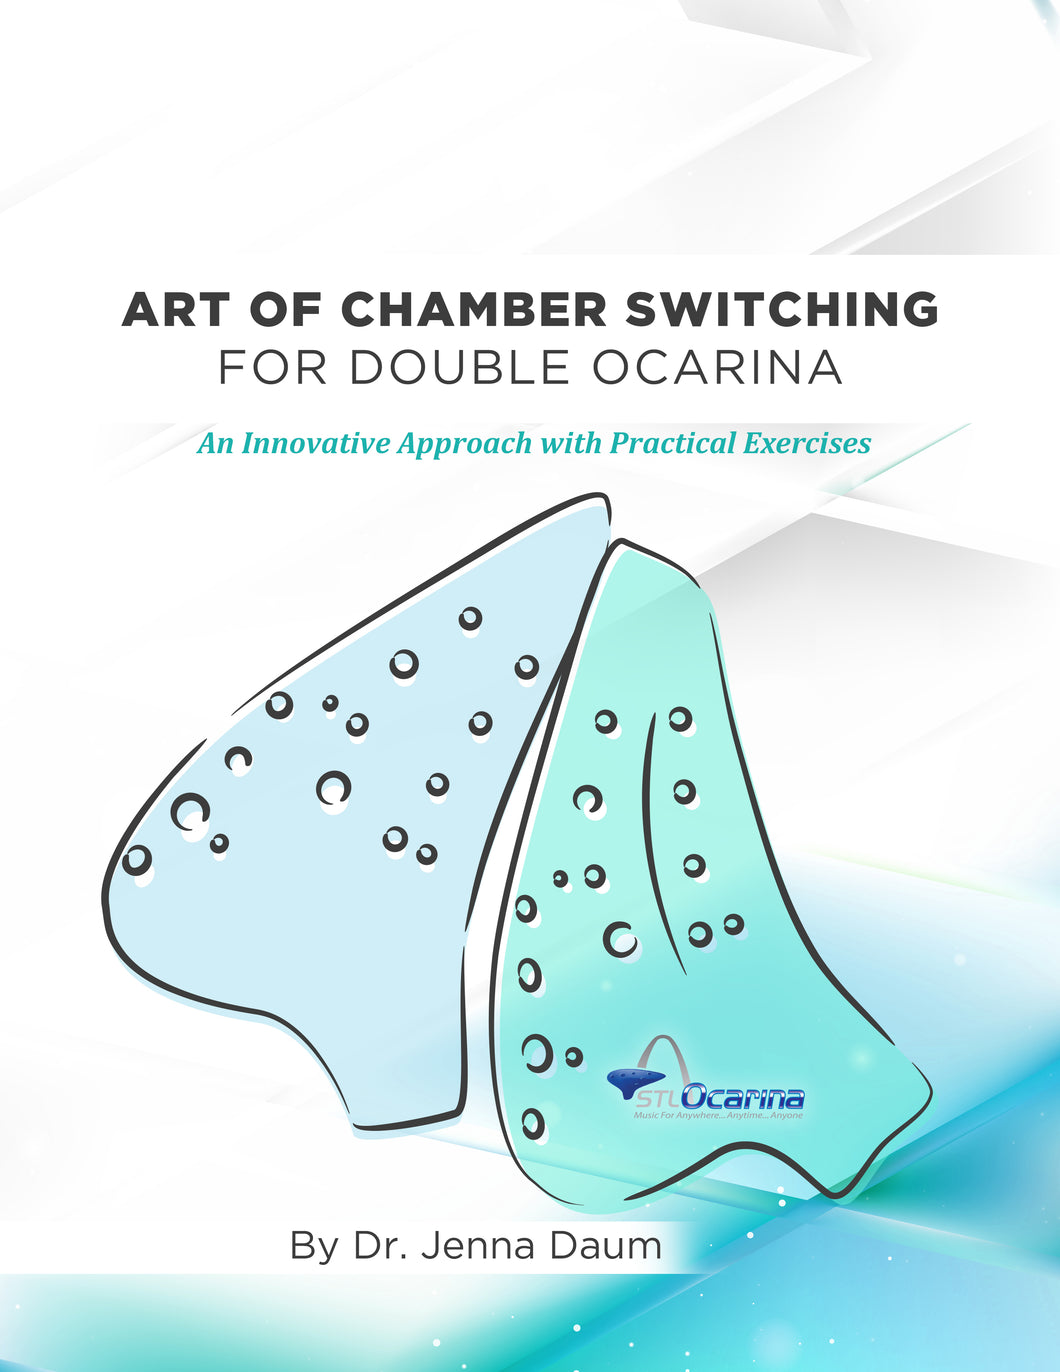 Art of Chamber Switching for Double Ocarina